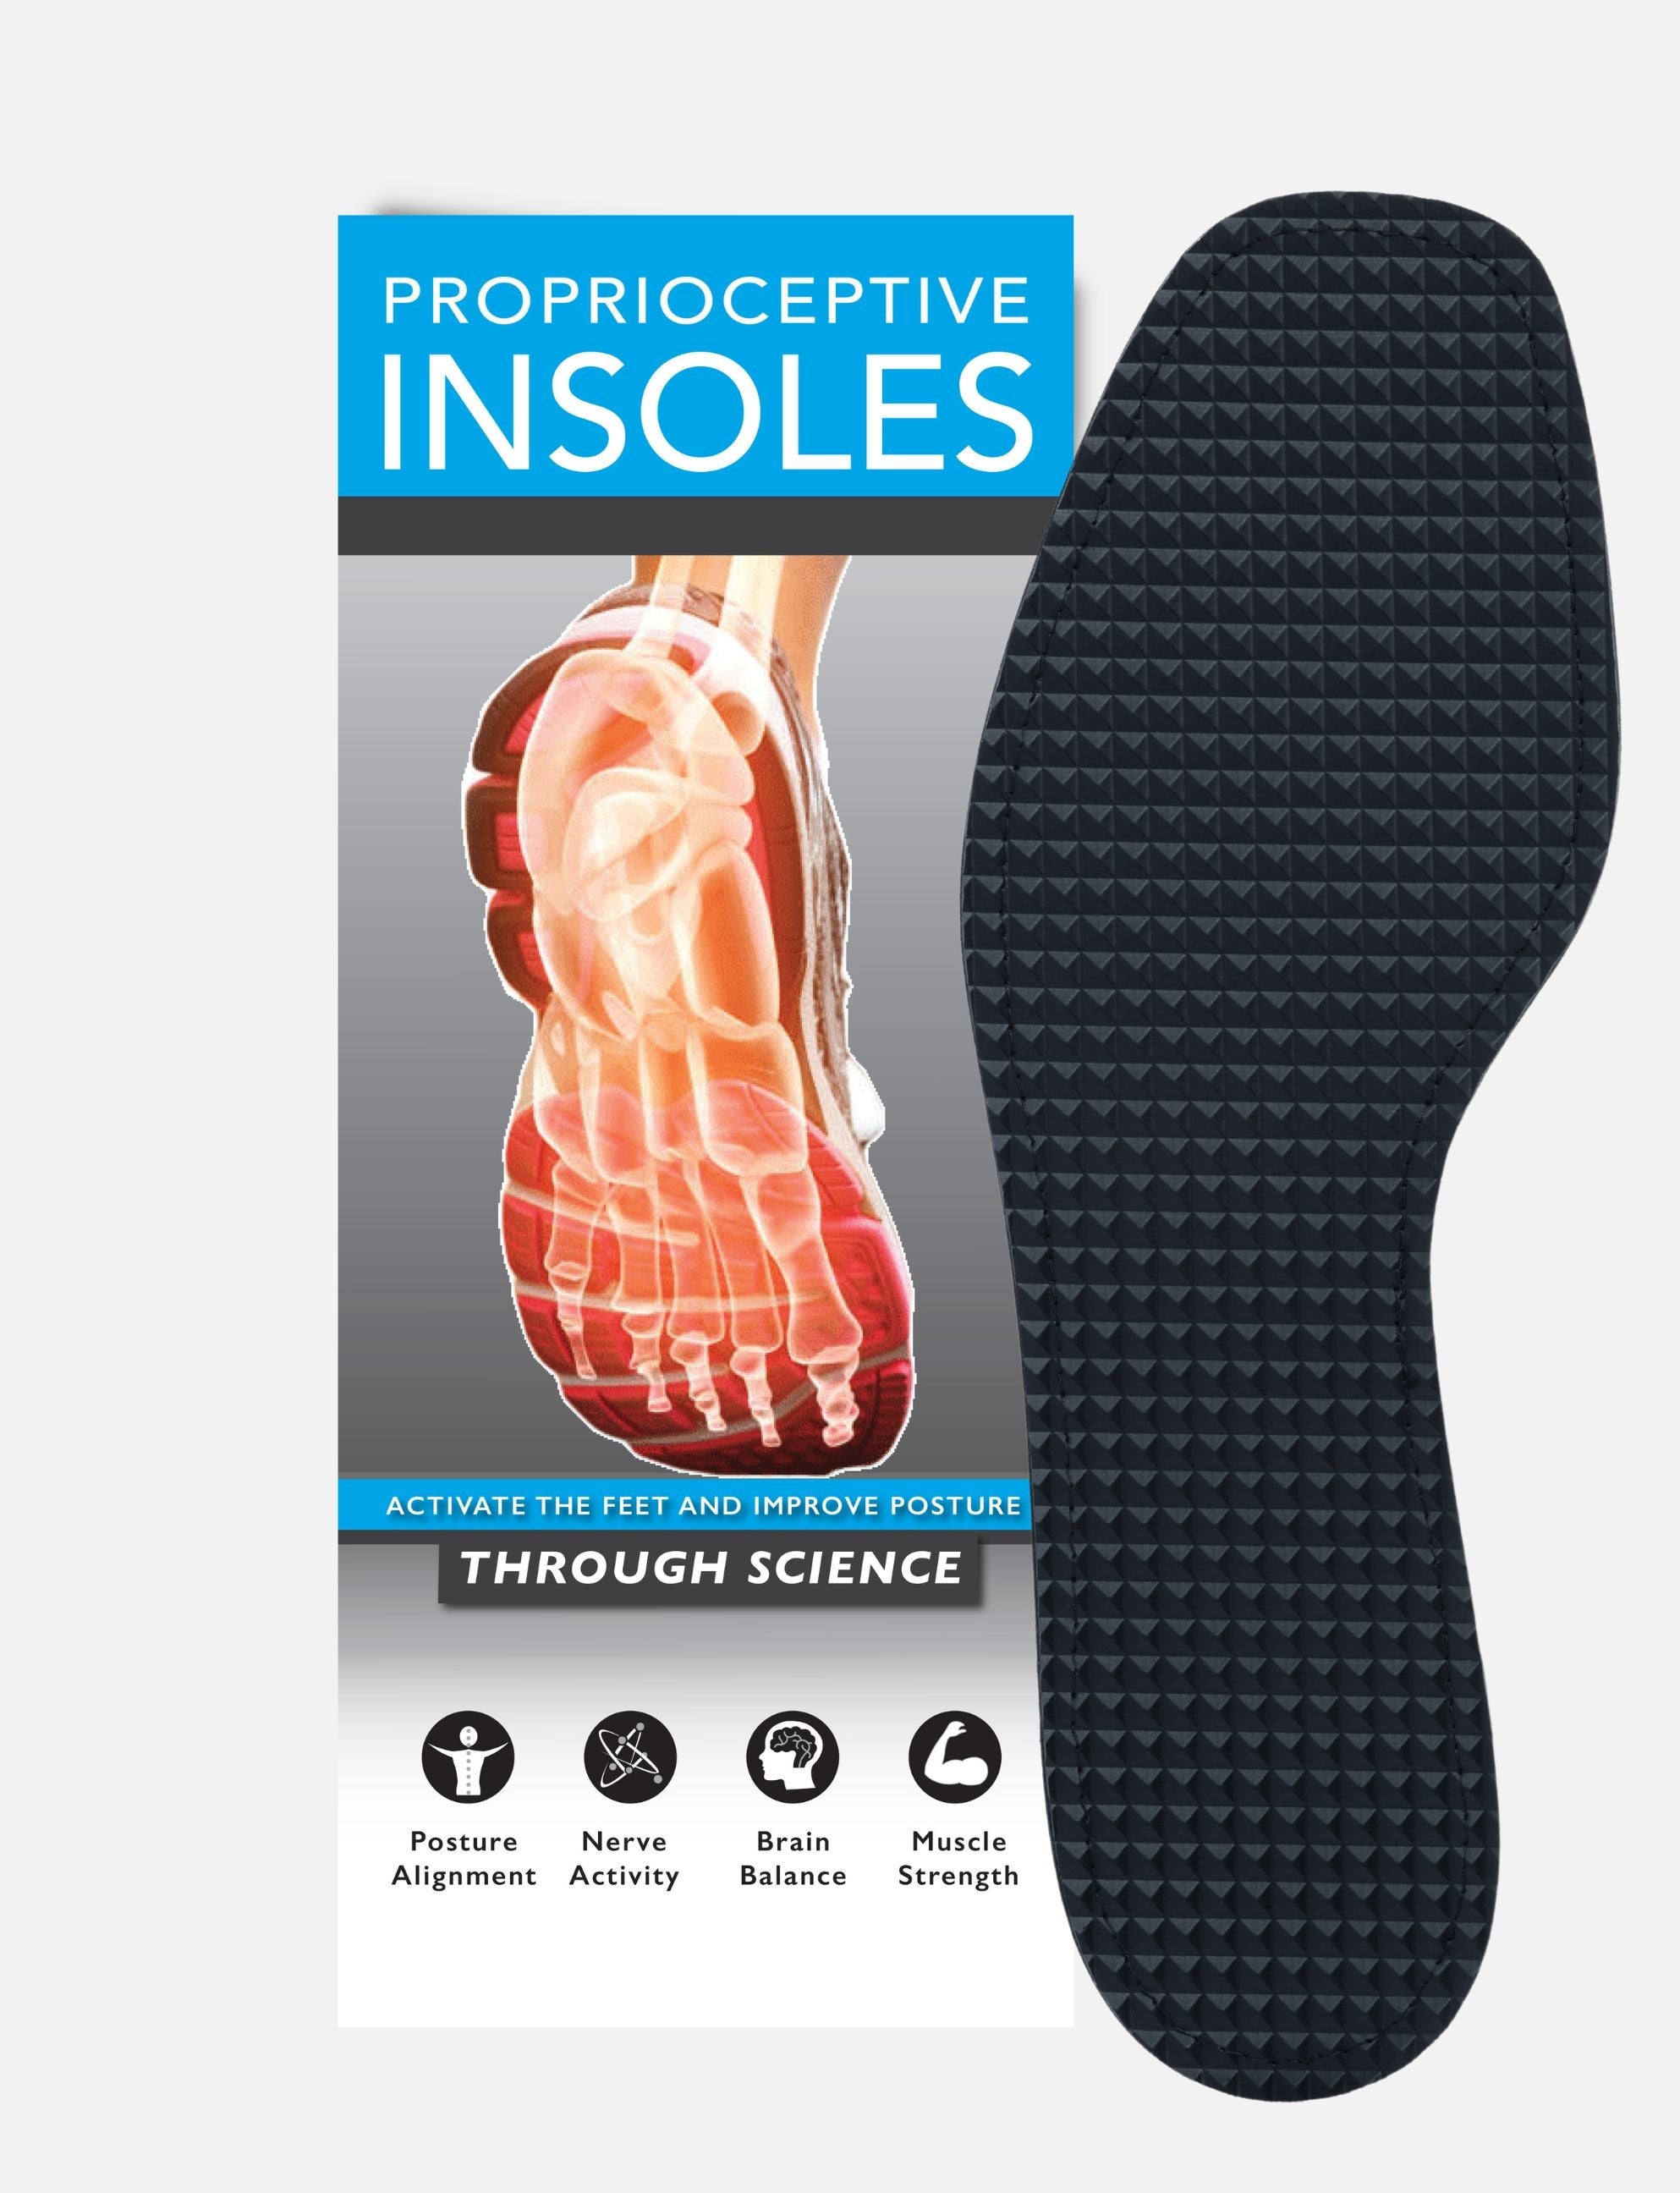 Posturepro's Proprioceptive Insoles for flat feet